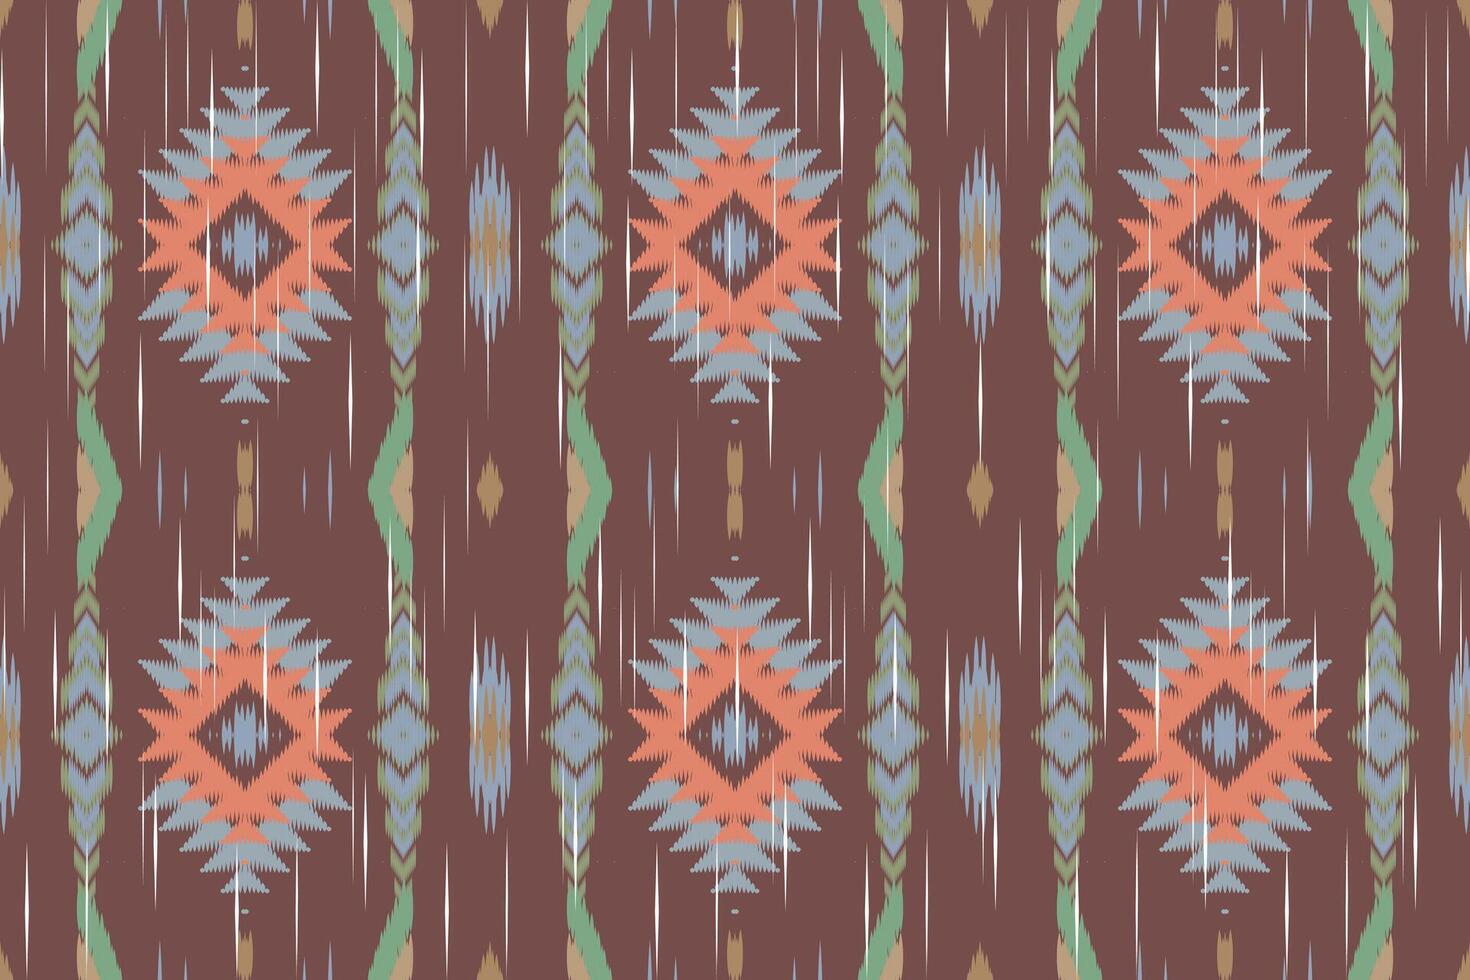 Ikat Paisley Embroidery on the Fabric in Indonesia,india and Asian countries.geometric Ethnic Oriental Seamless pattern.aztec Style. illustration.design for Texture,fabric,clothing,wrapping,carpet. vector